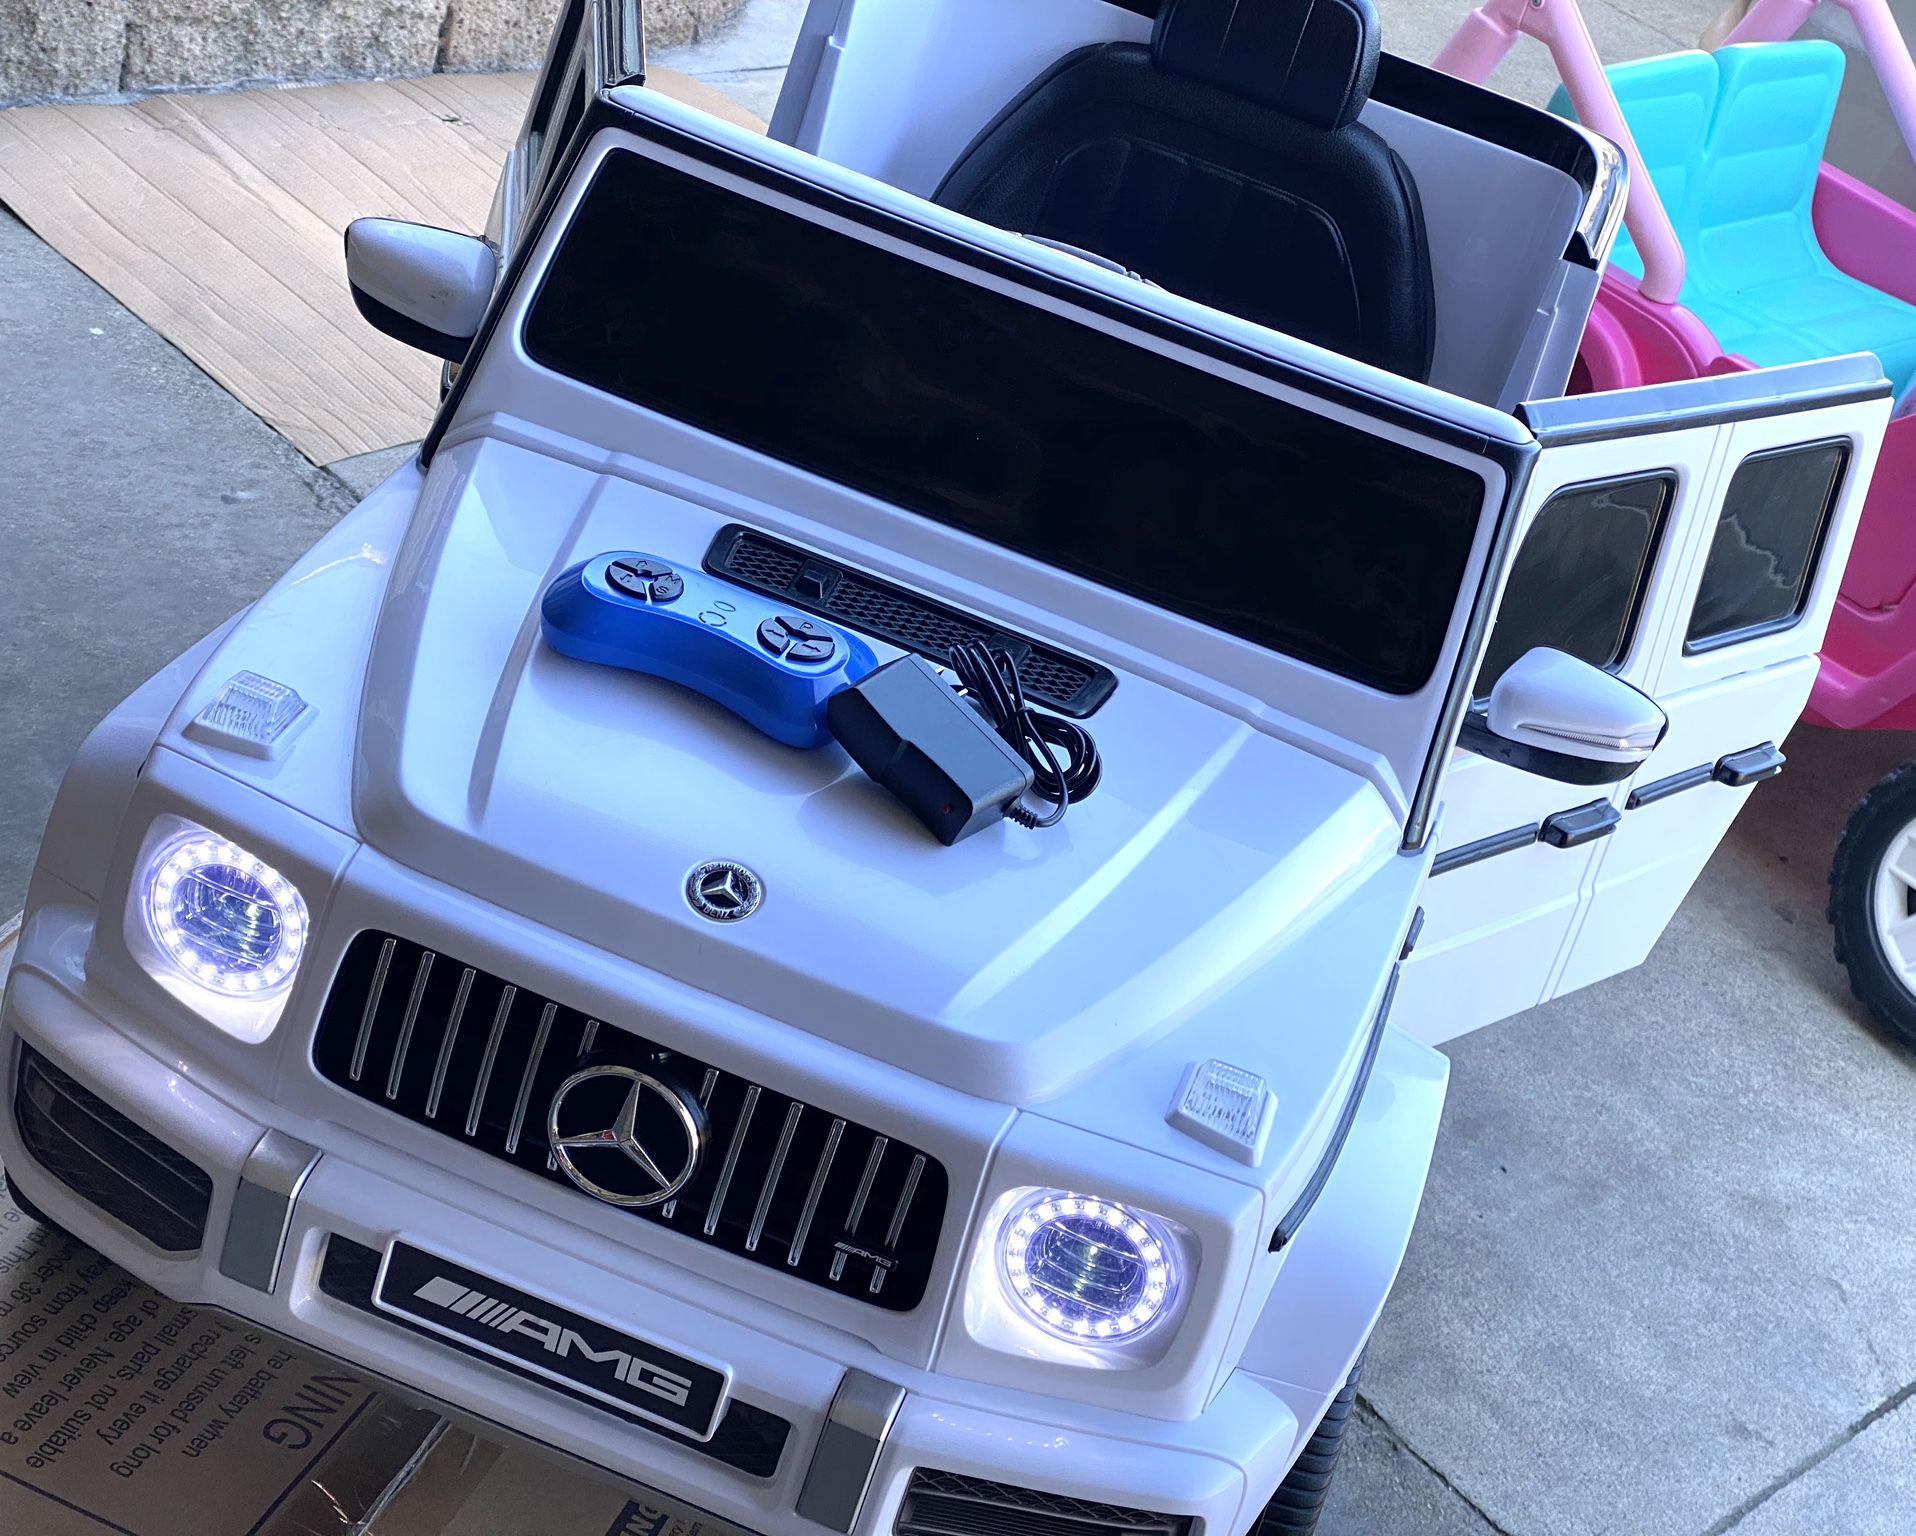 NEW CONDITION Mercedes Benz AMG G63 G-Wagon 12volt Electric Kid Ride On Car Power Wheels